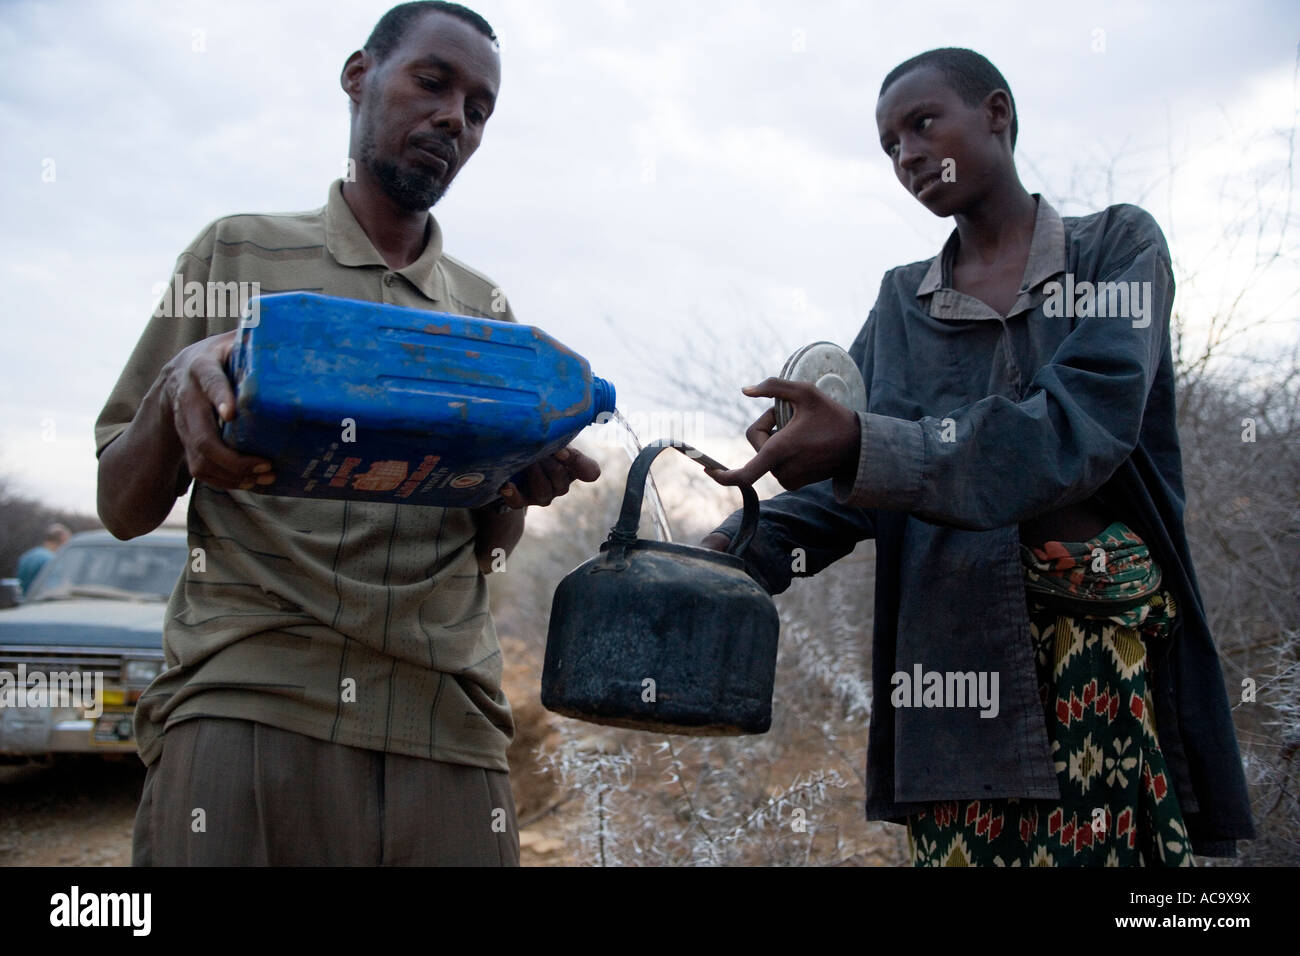 WESTERN SOMALIA 2nd March 2006 A driver gives water to a nomad begging for water by the side of the road Stock Photo